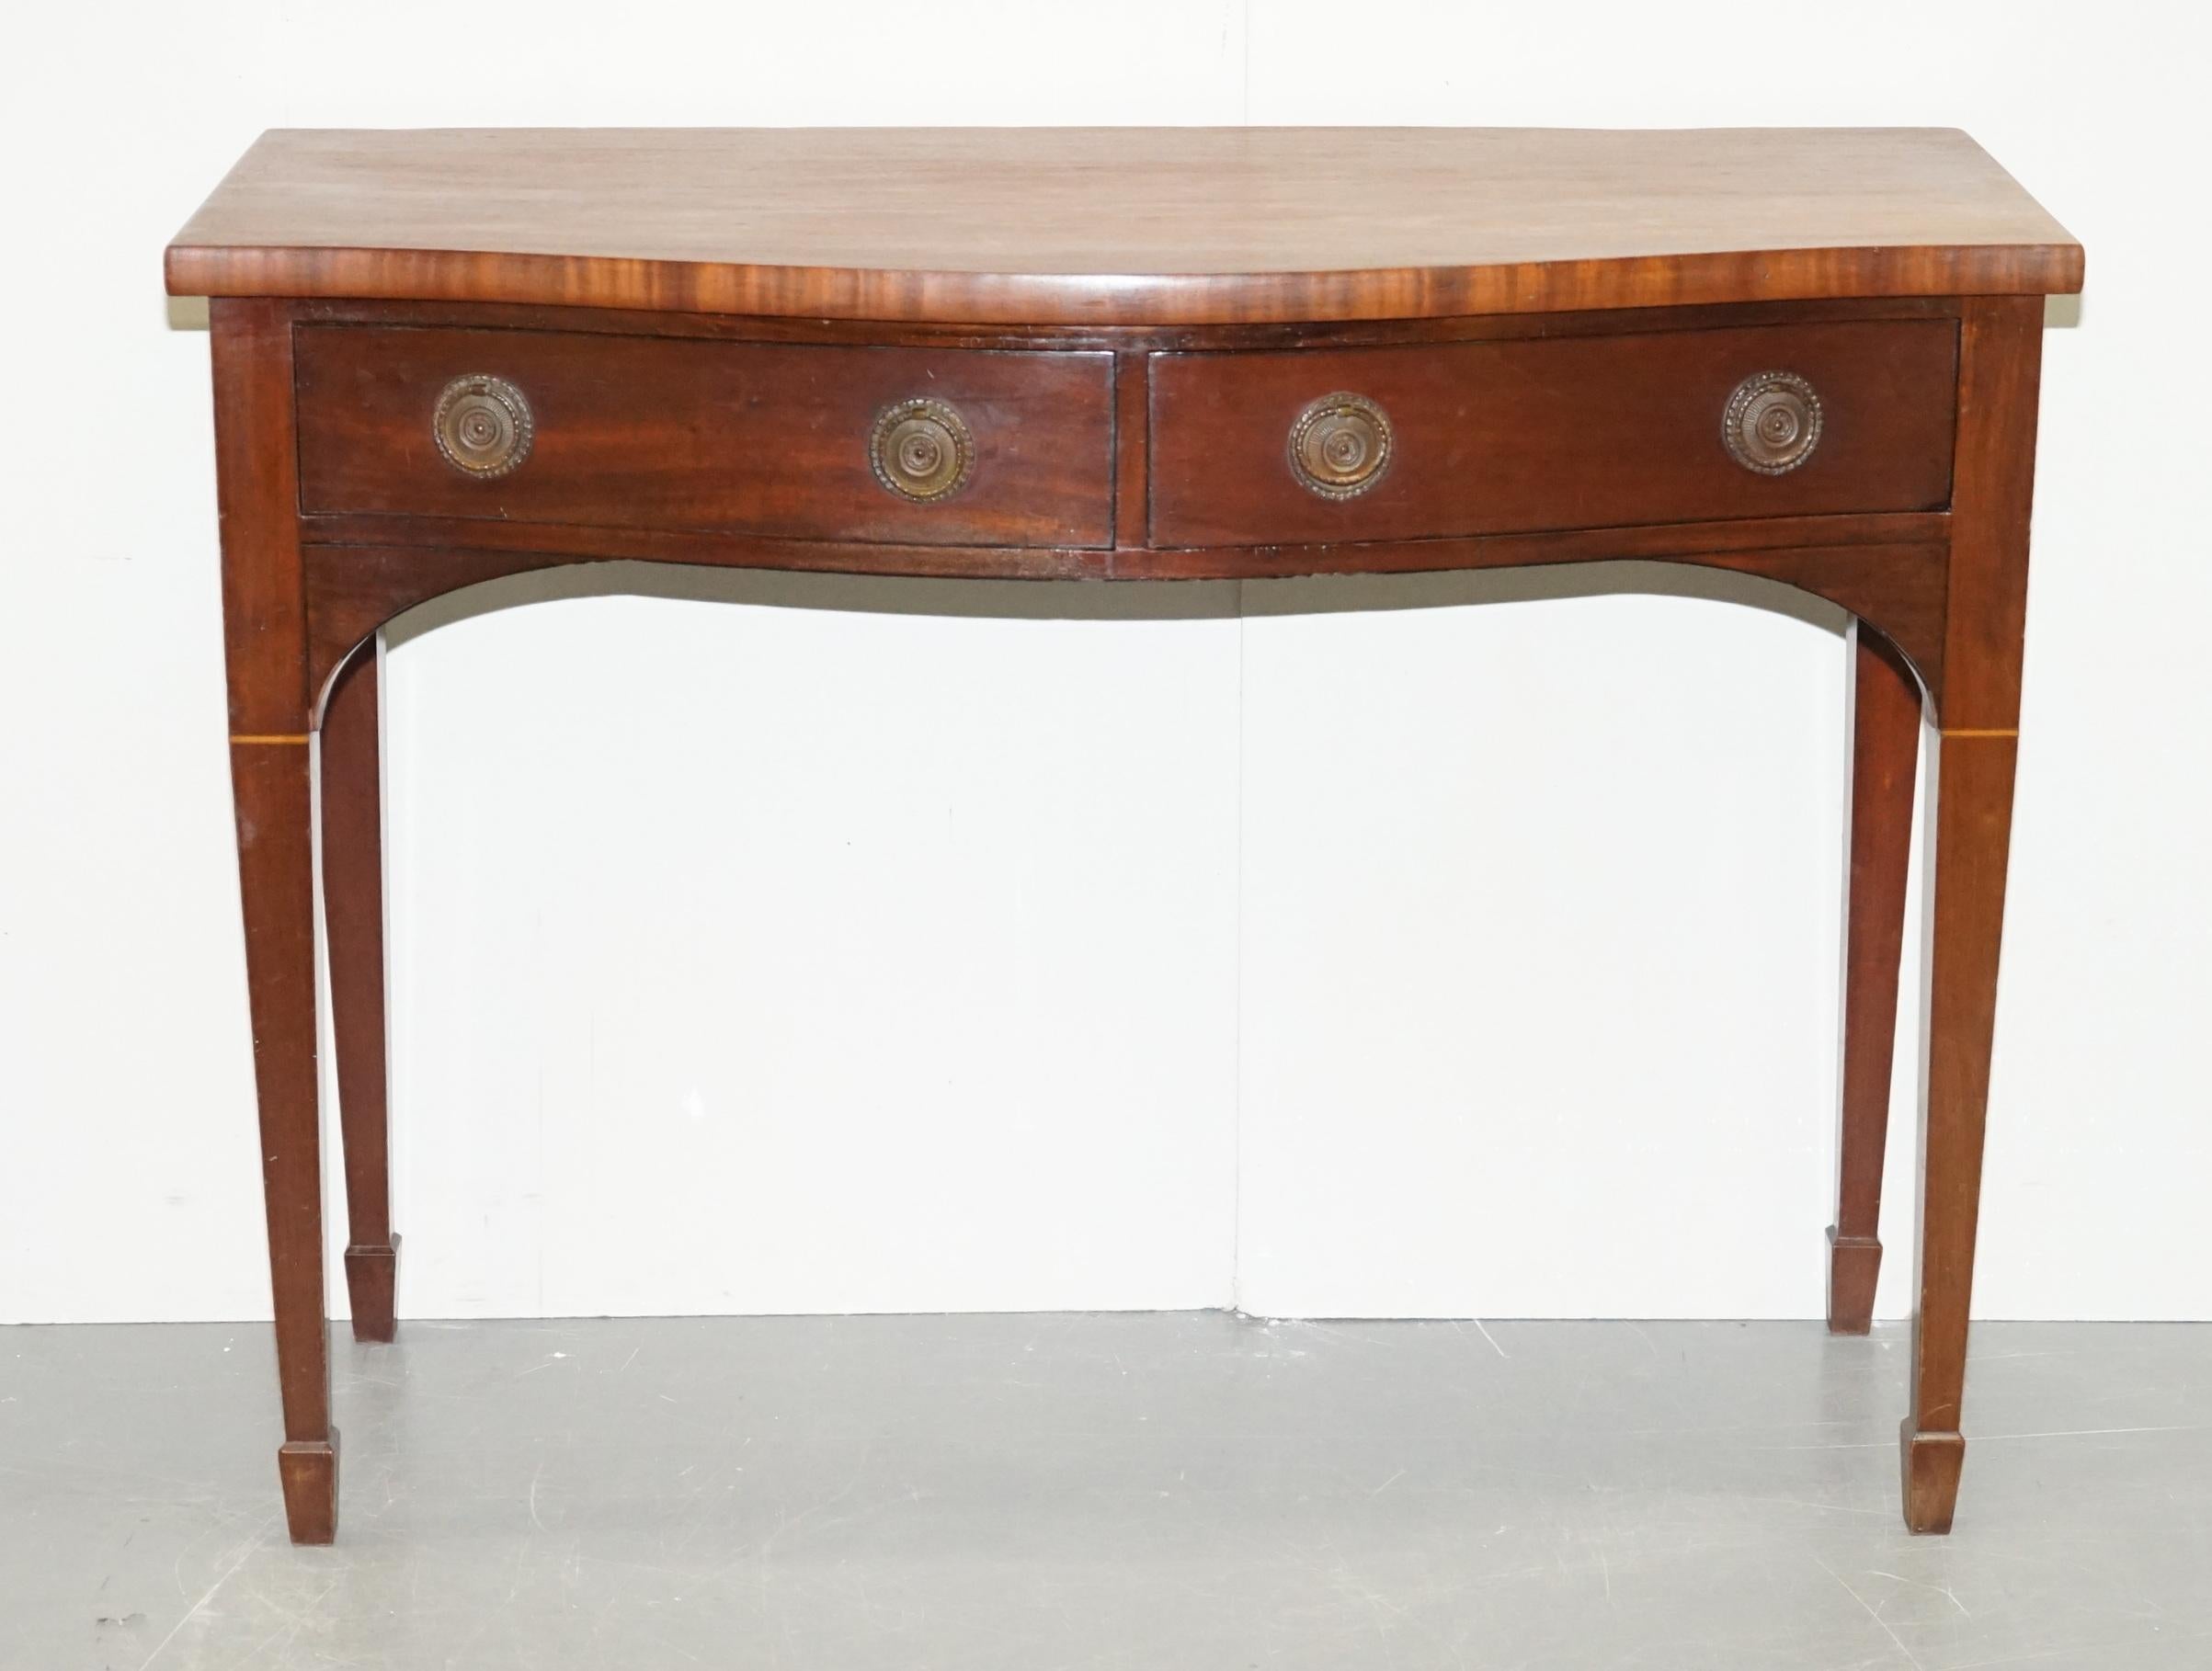 High Victorian Pair of 1880 Howard & Son's Victorian Hardwood Console Tables with Twin Drawers